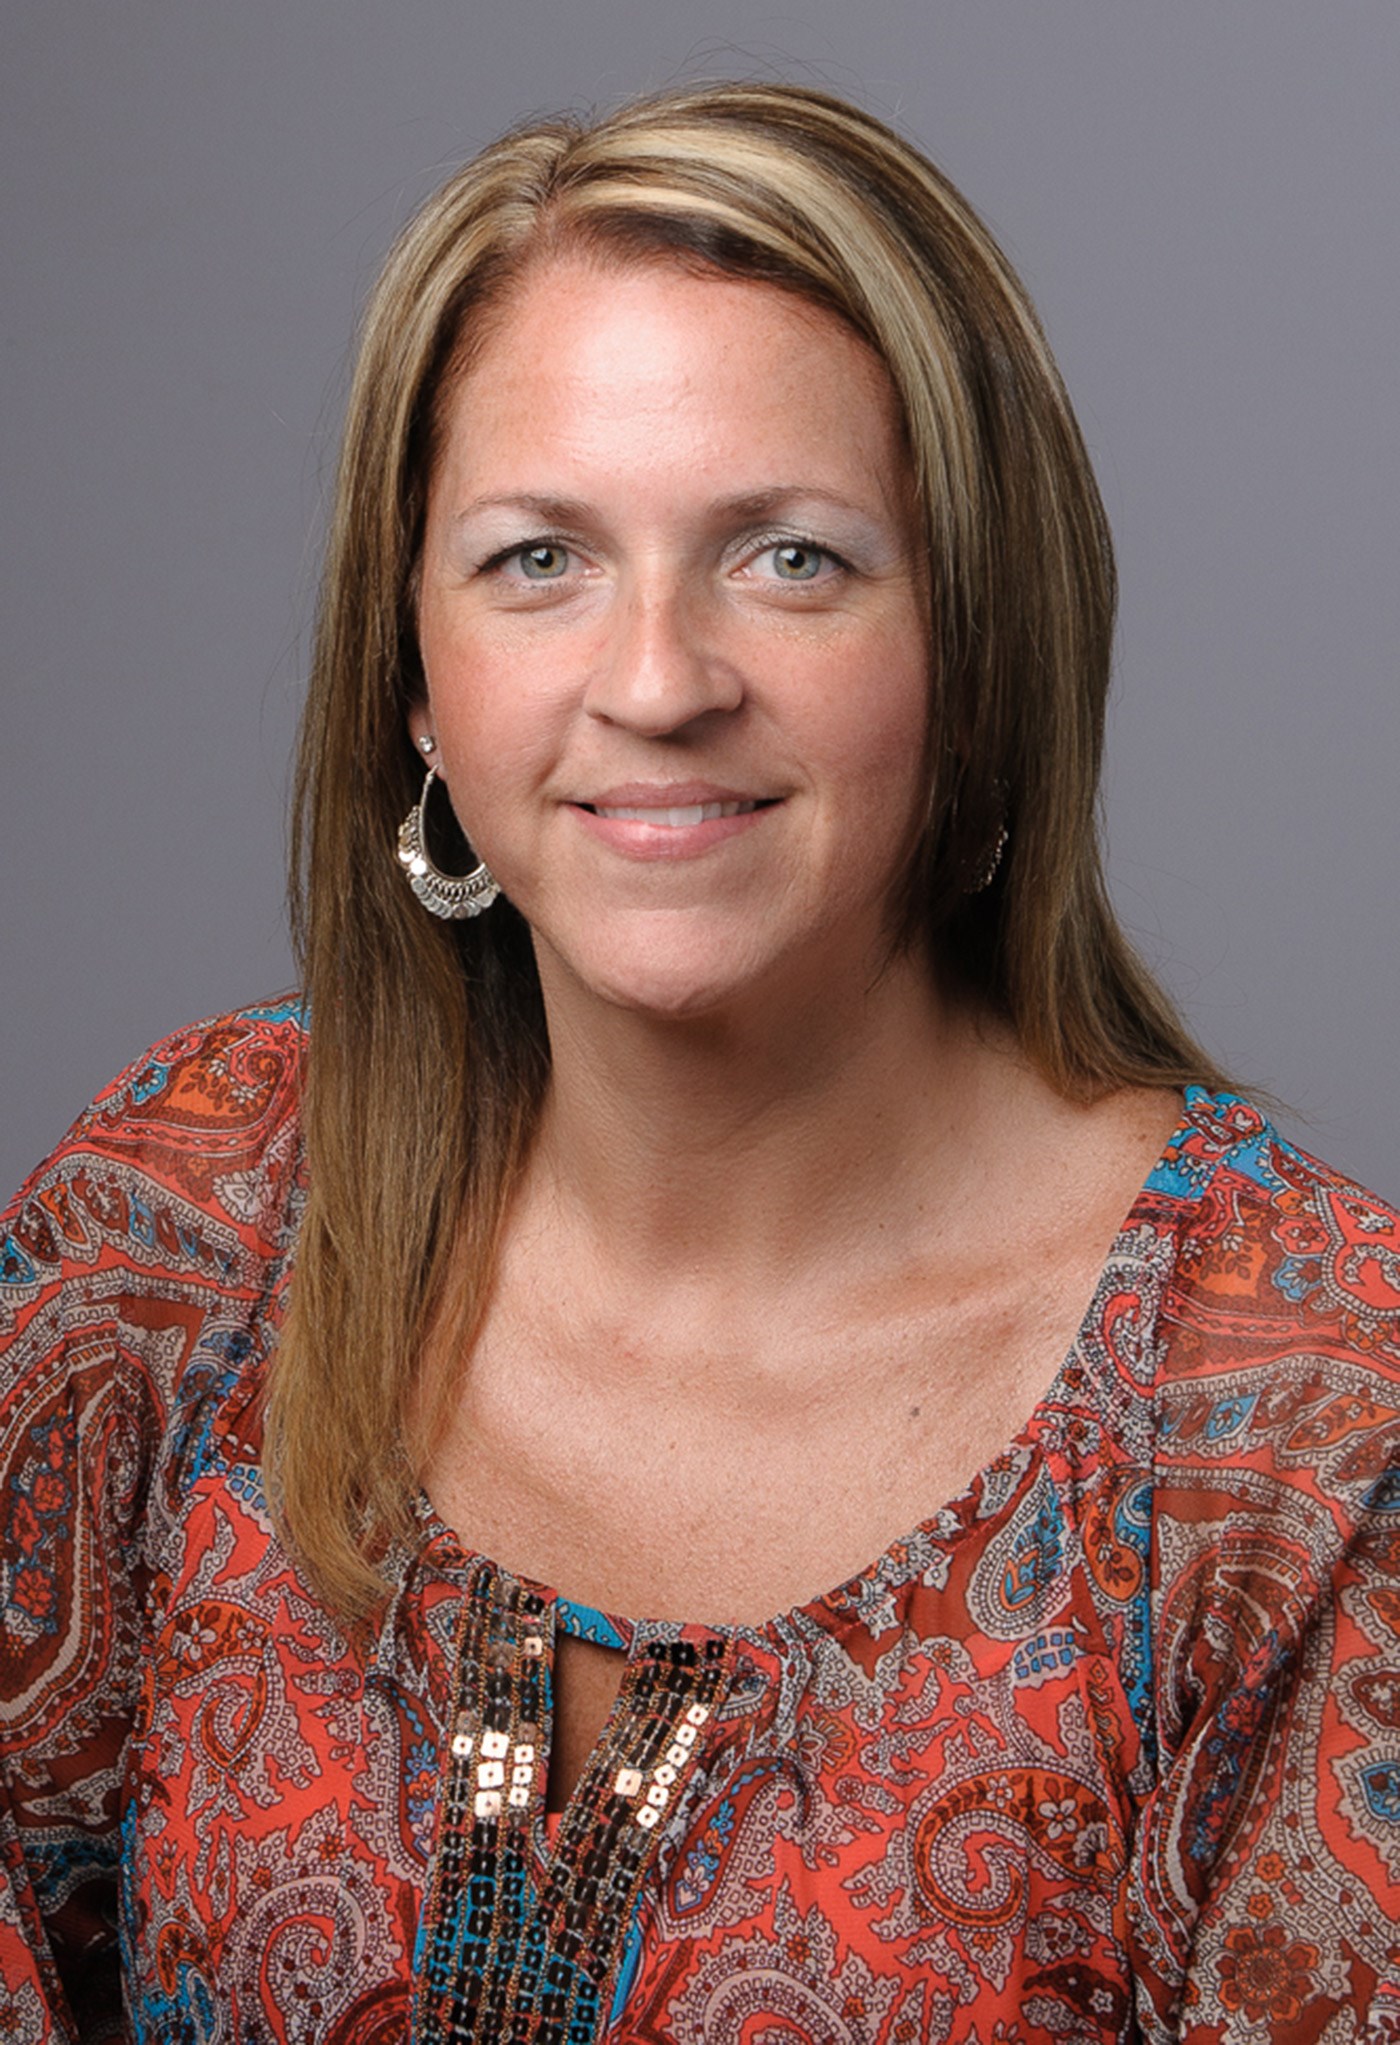 Keri Belodeau is the Business Manager for Administrative Services & Environmental & Emergency Management at UMass Lowell.